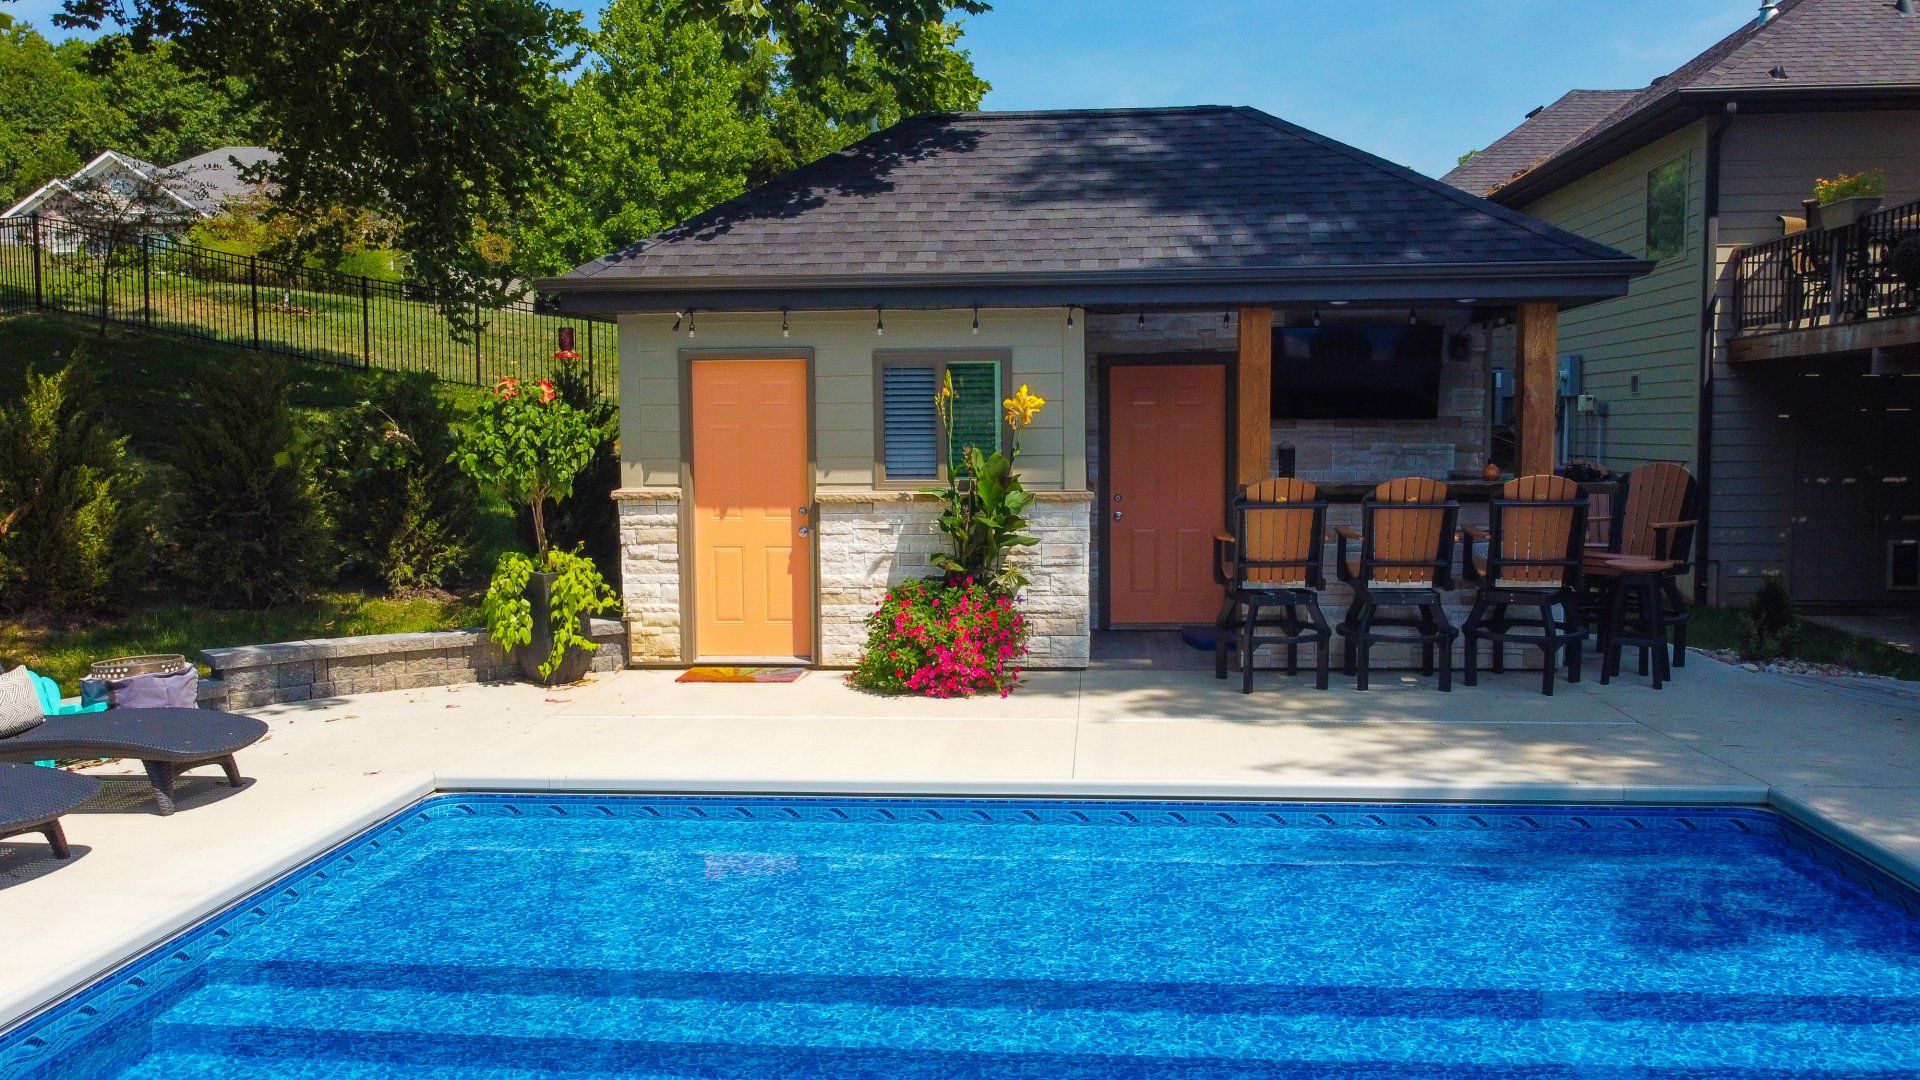 Peavler Construction Can Build Your Inground Pool & Pool House in Columbia, Missouri This Summer.